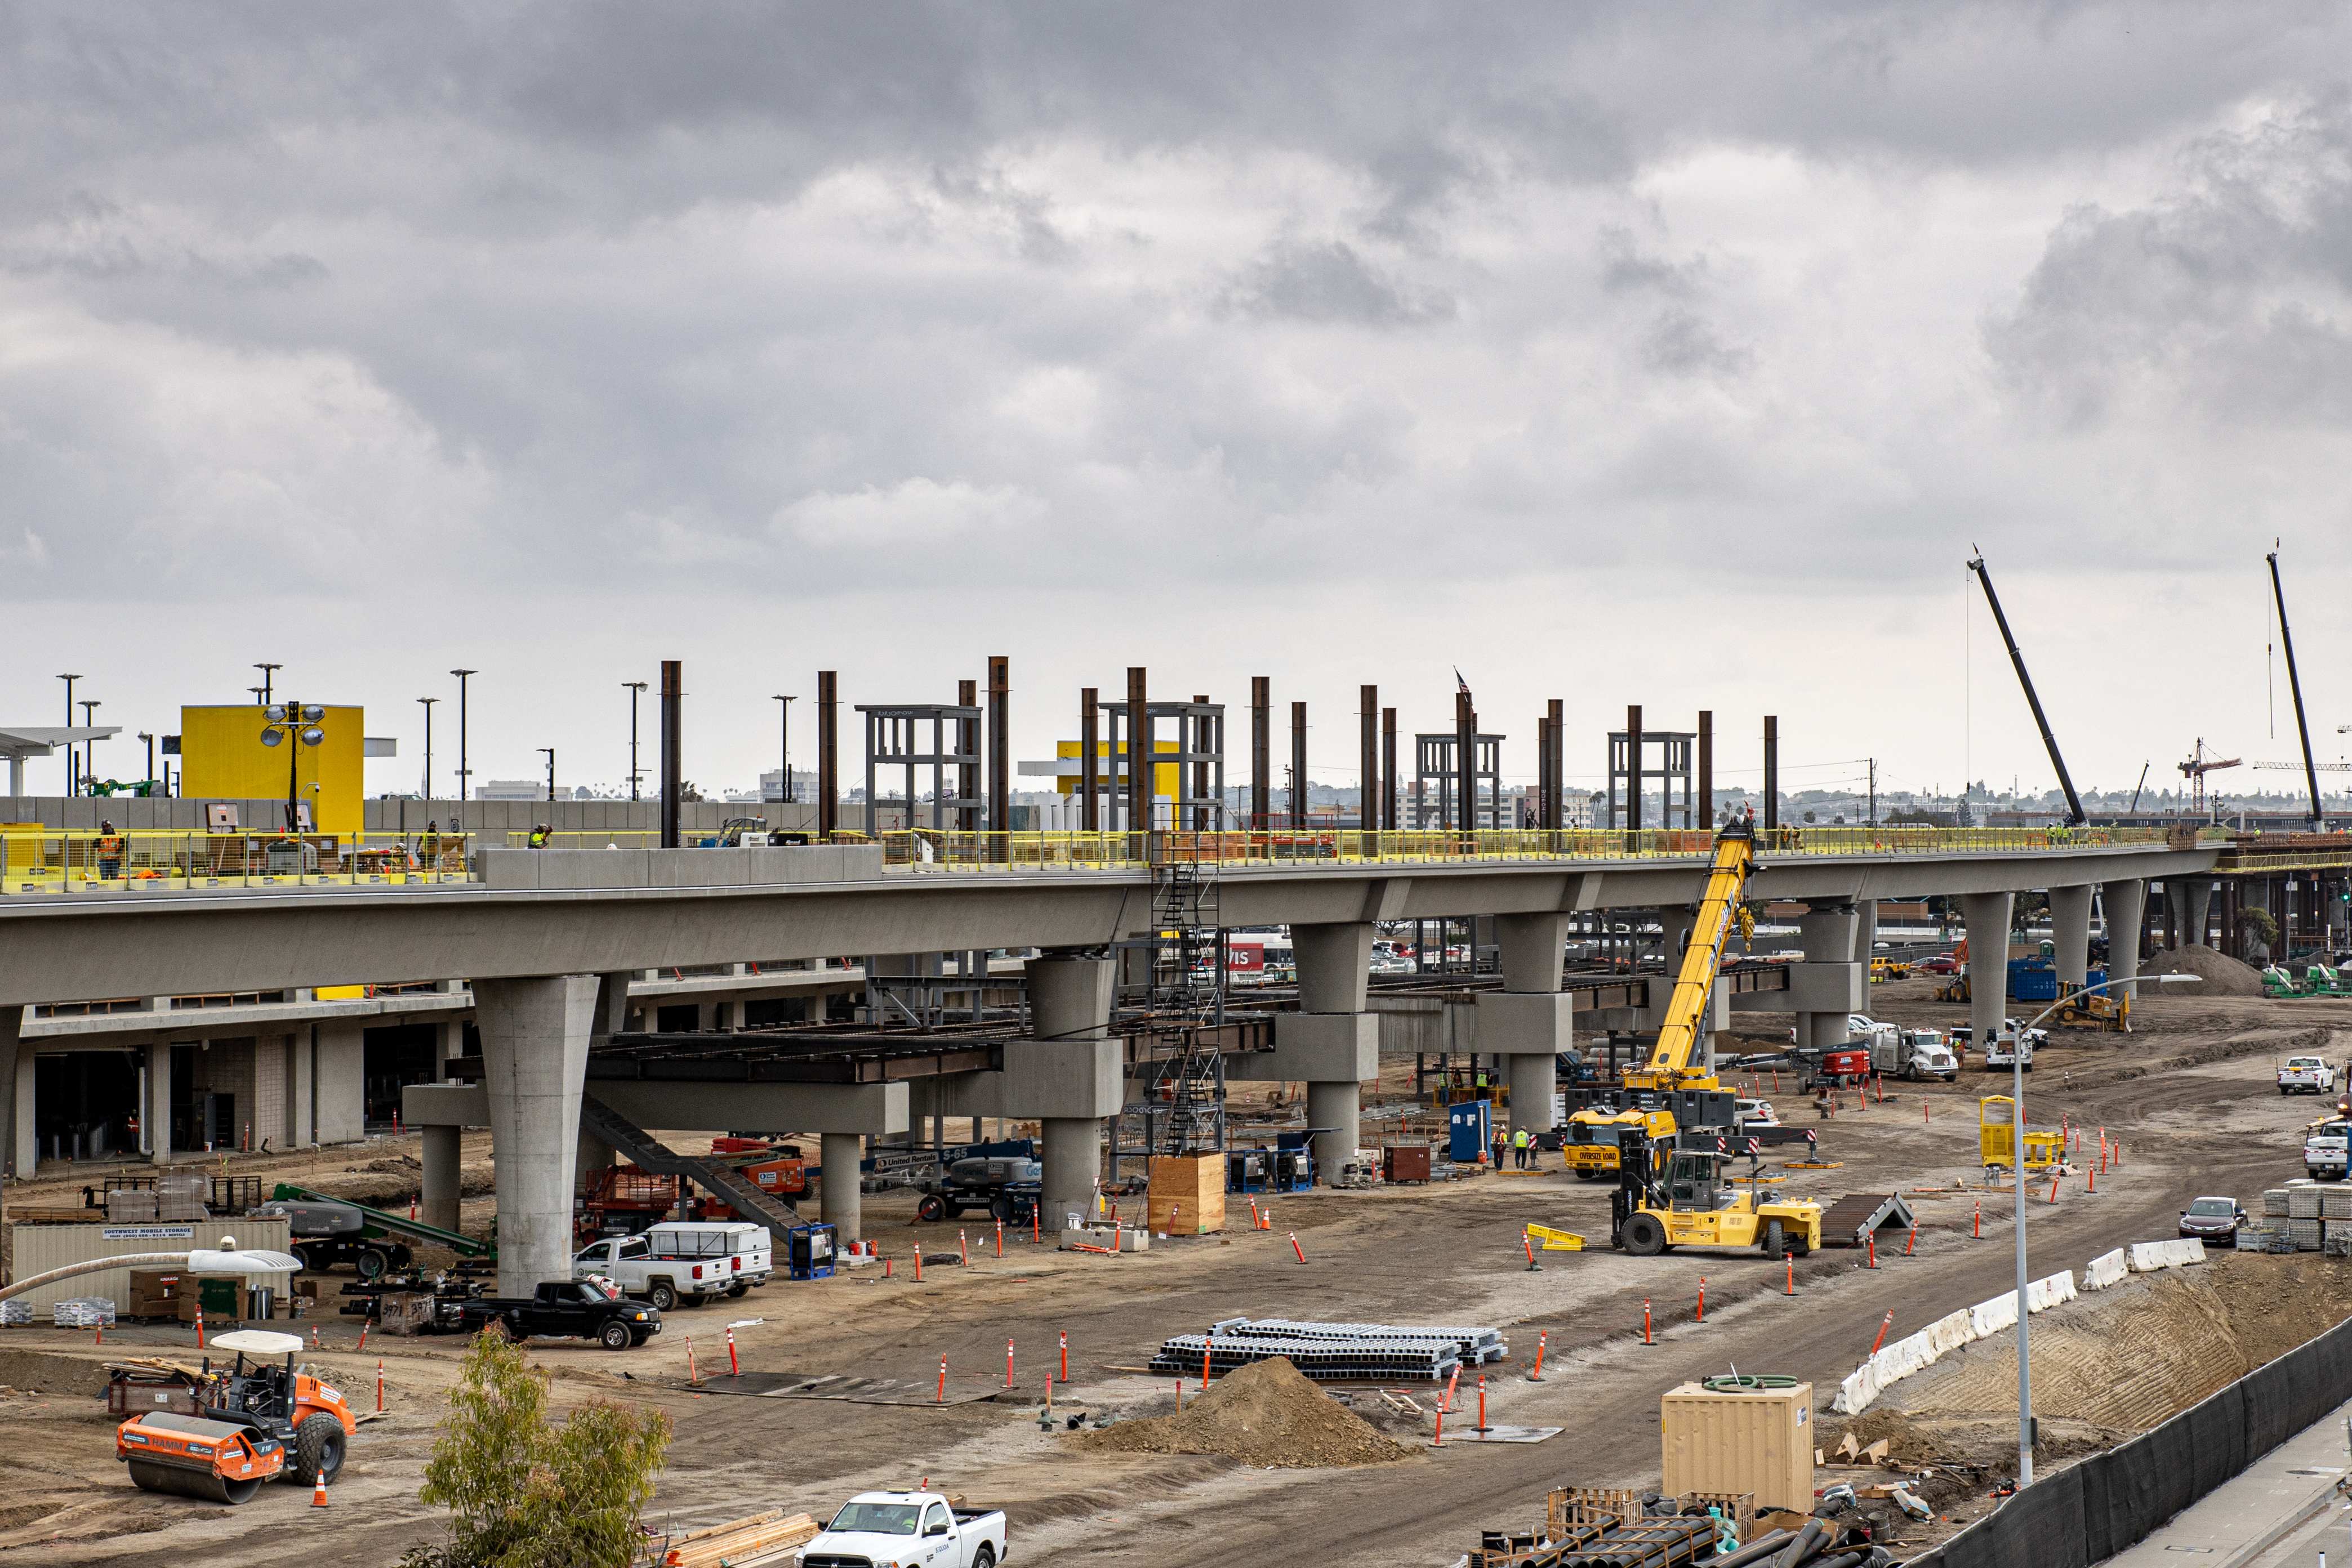 At the future Intermodal Transportation Facility-West station, steel for the station's circulation level, canopy and elevators is now in place.